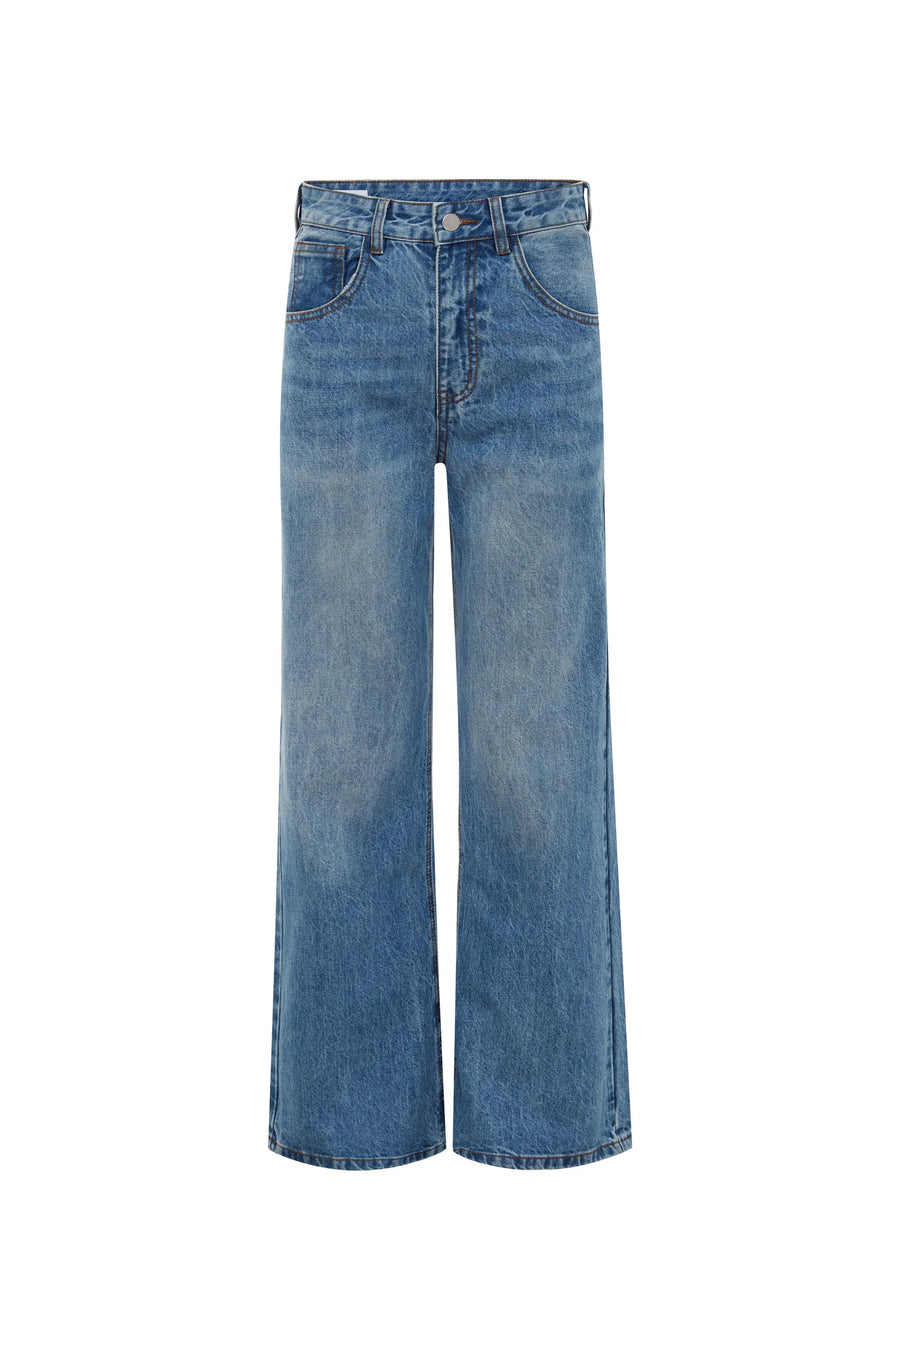 Molly Jeans Classic Wash